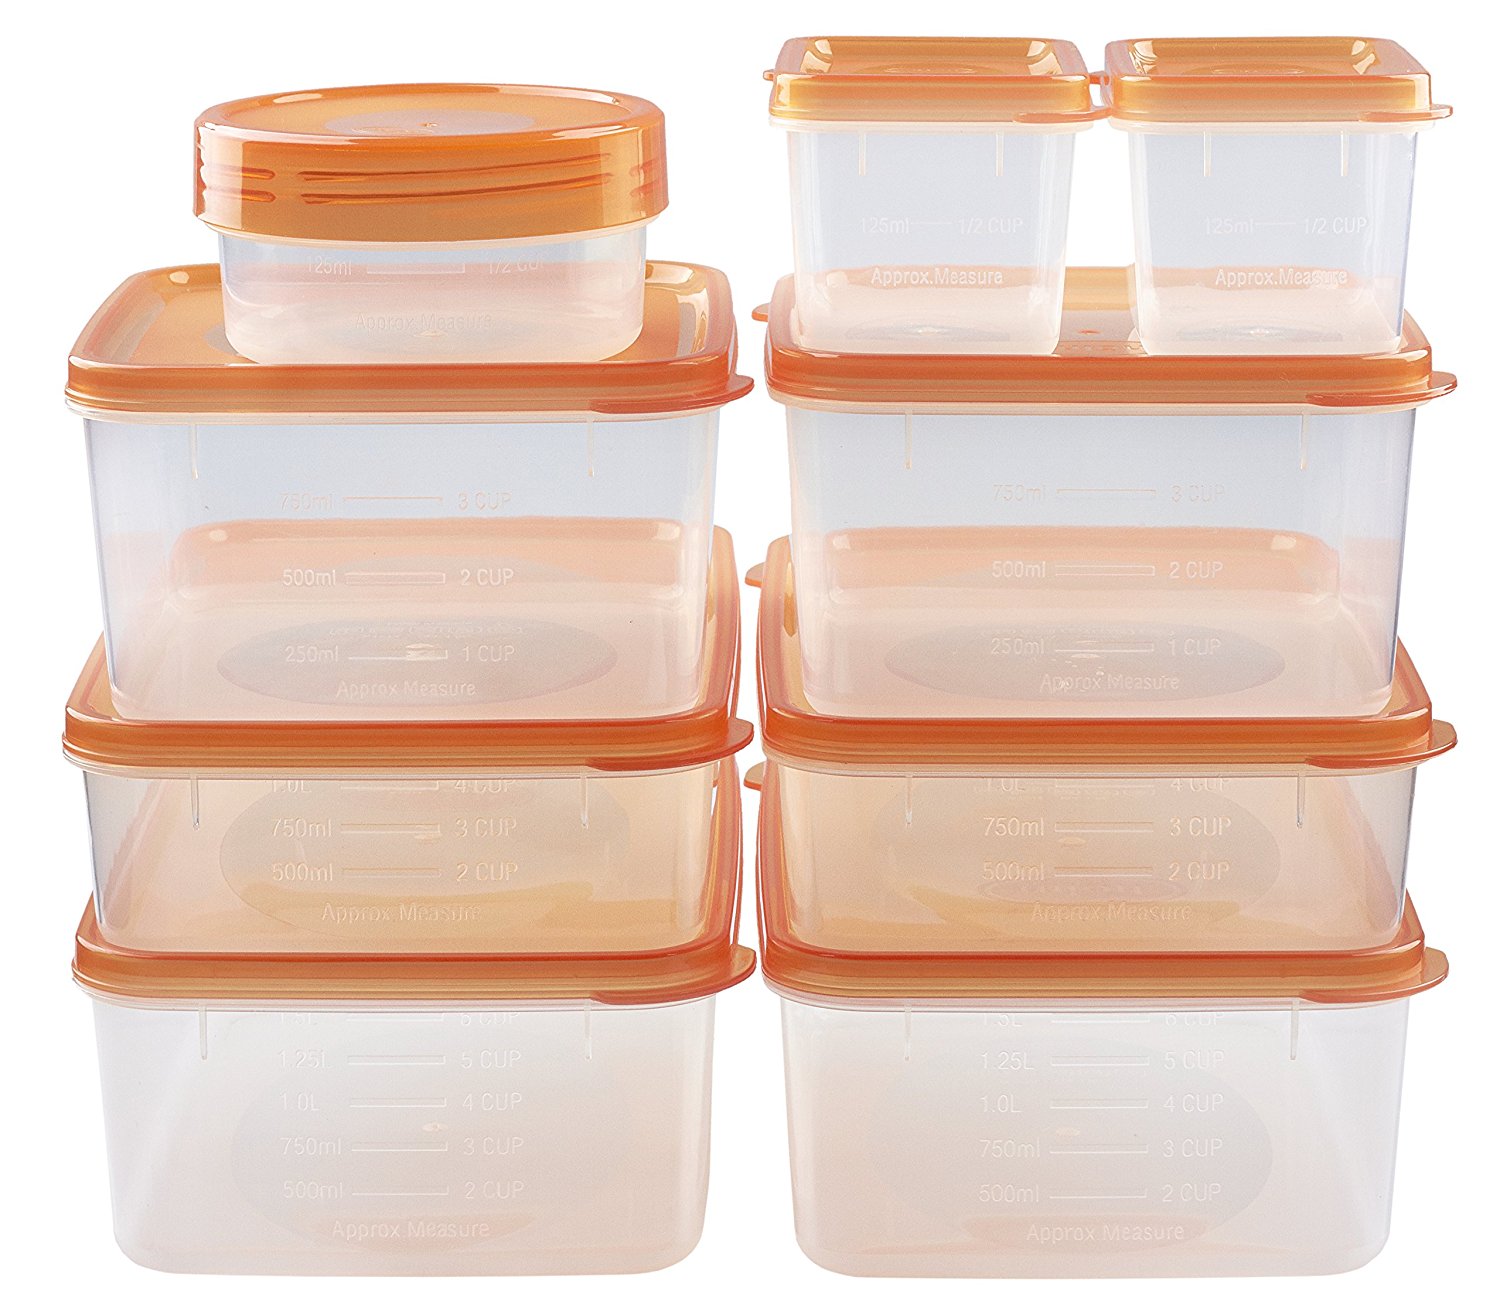 3. hölm BPA Free Reusable Square Food Storage Containers with Lids